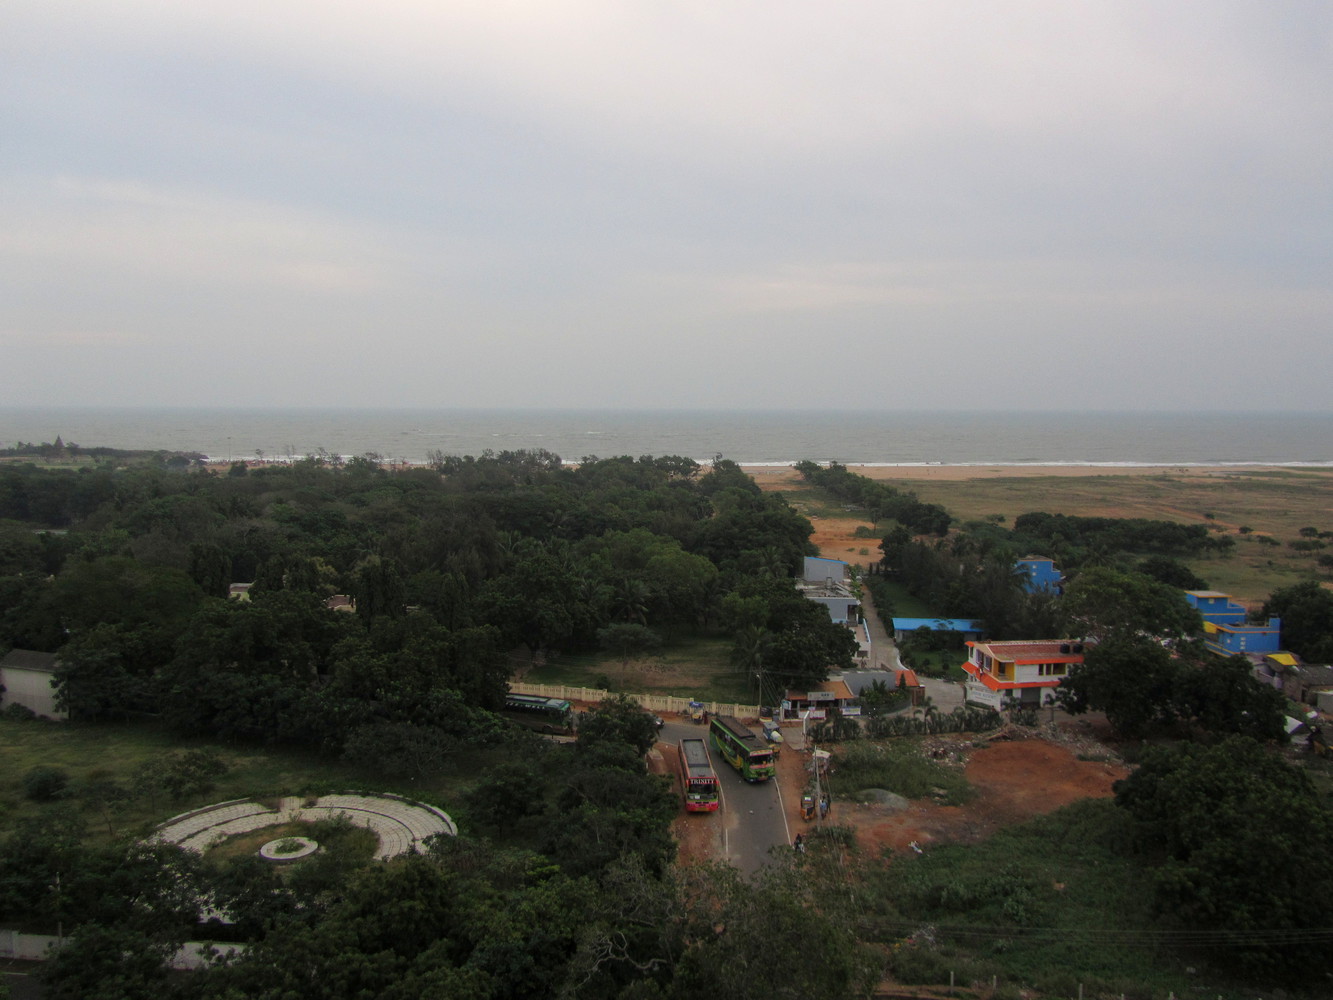 View of a town and sea from the top